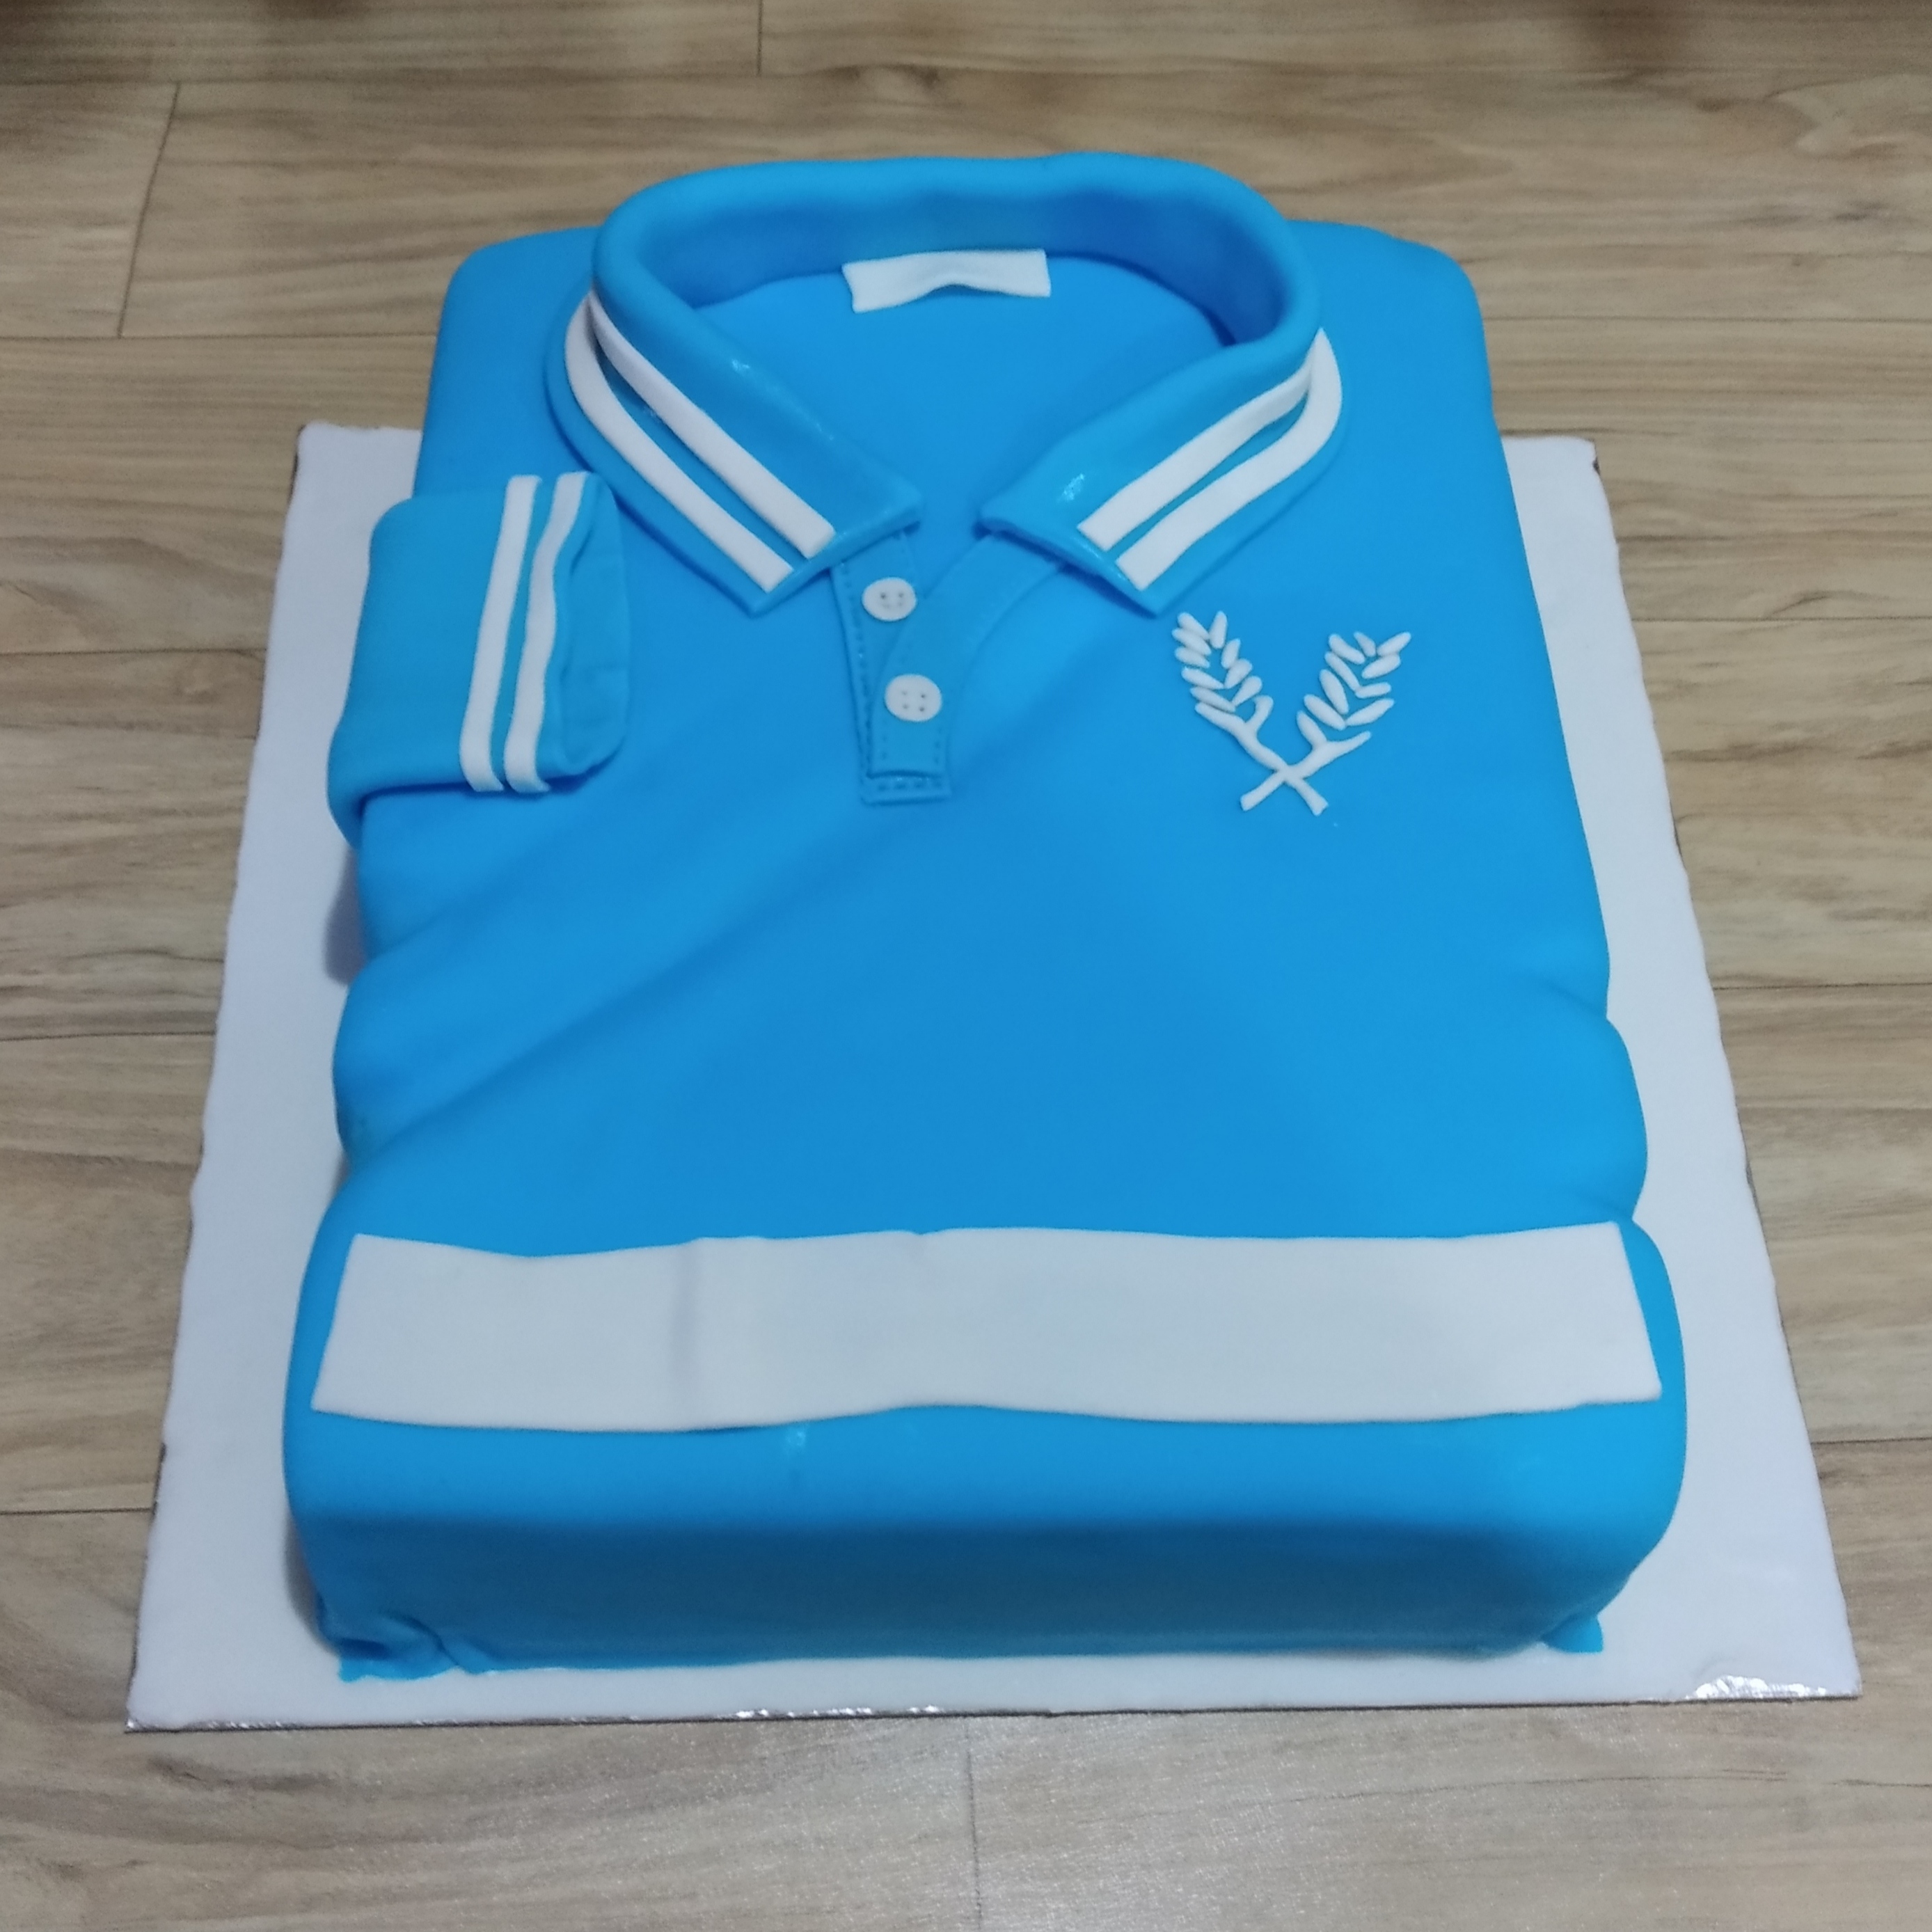 A very decent design of Shirt Cake available